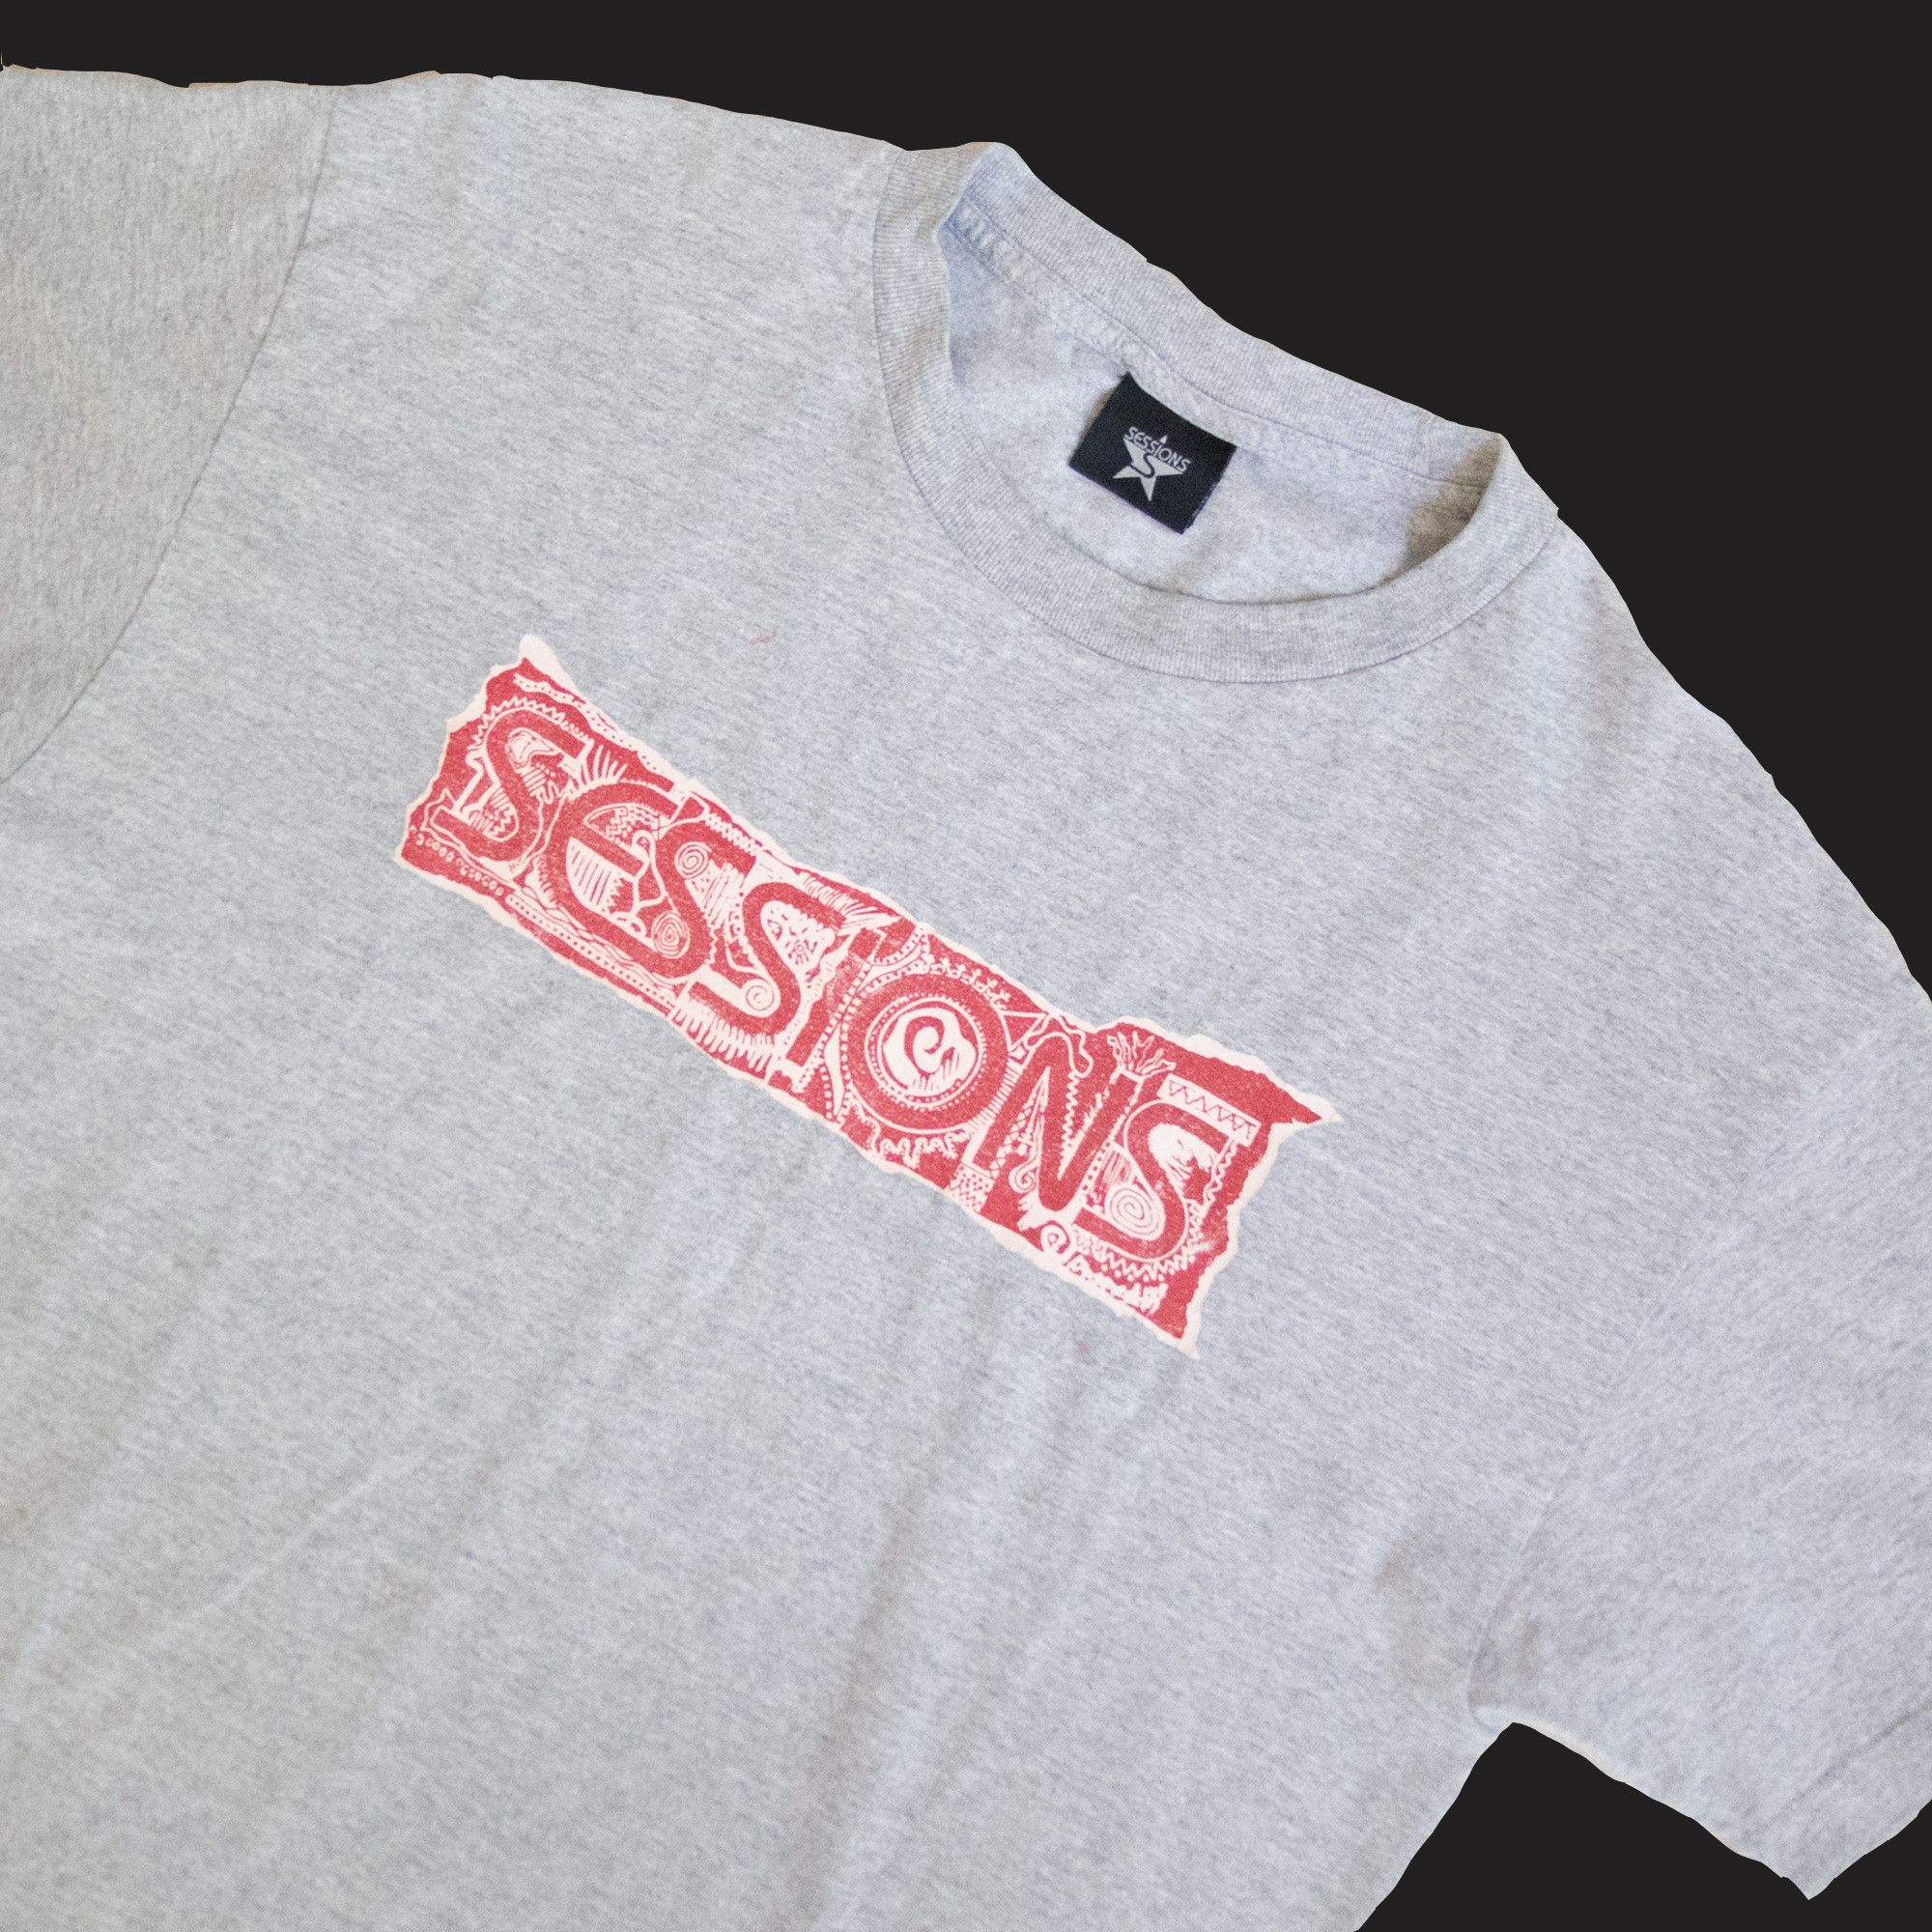 Sessions Vintage 90s Sessions MFG Rare Shirt Large Size US L / EU 52-54 / 3 - 2 Preview